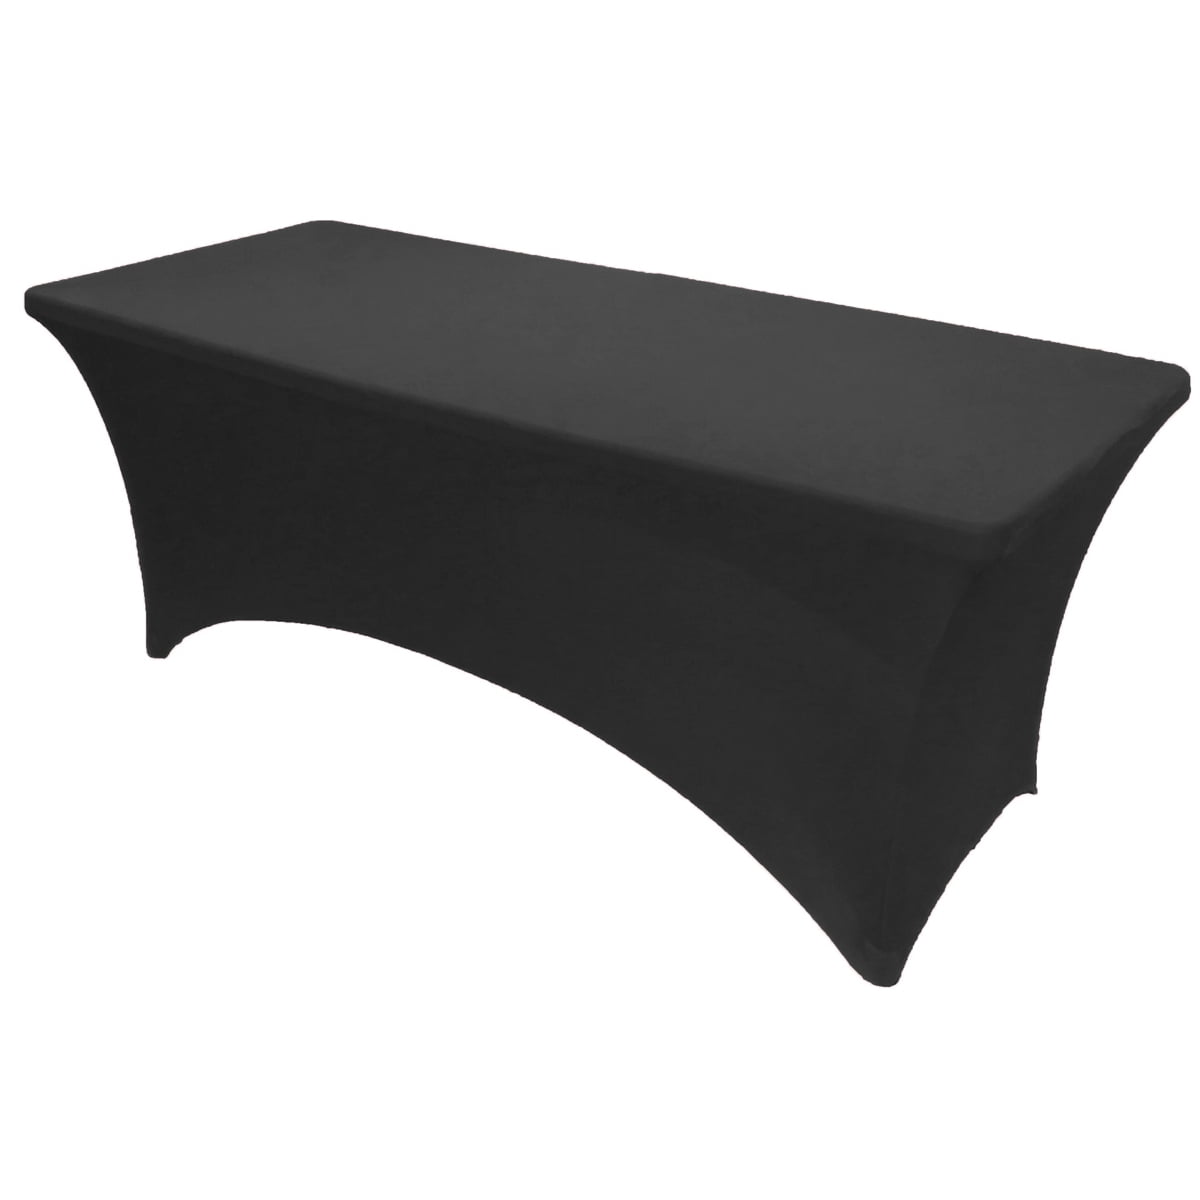 Standard 5 ft SPANDEX Fitted Tablecloth Stretch Table Cover BLACK 